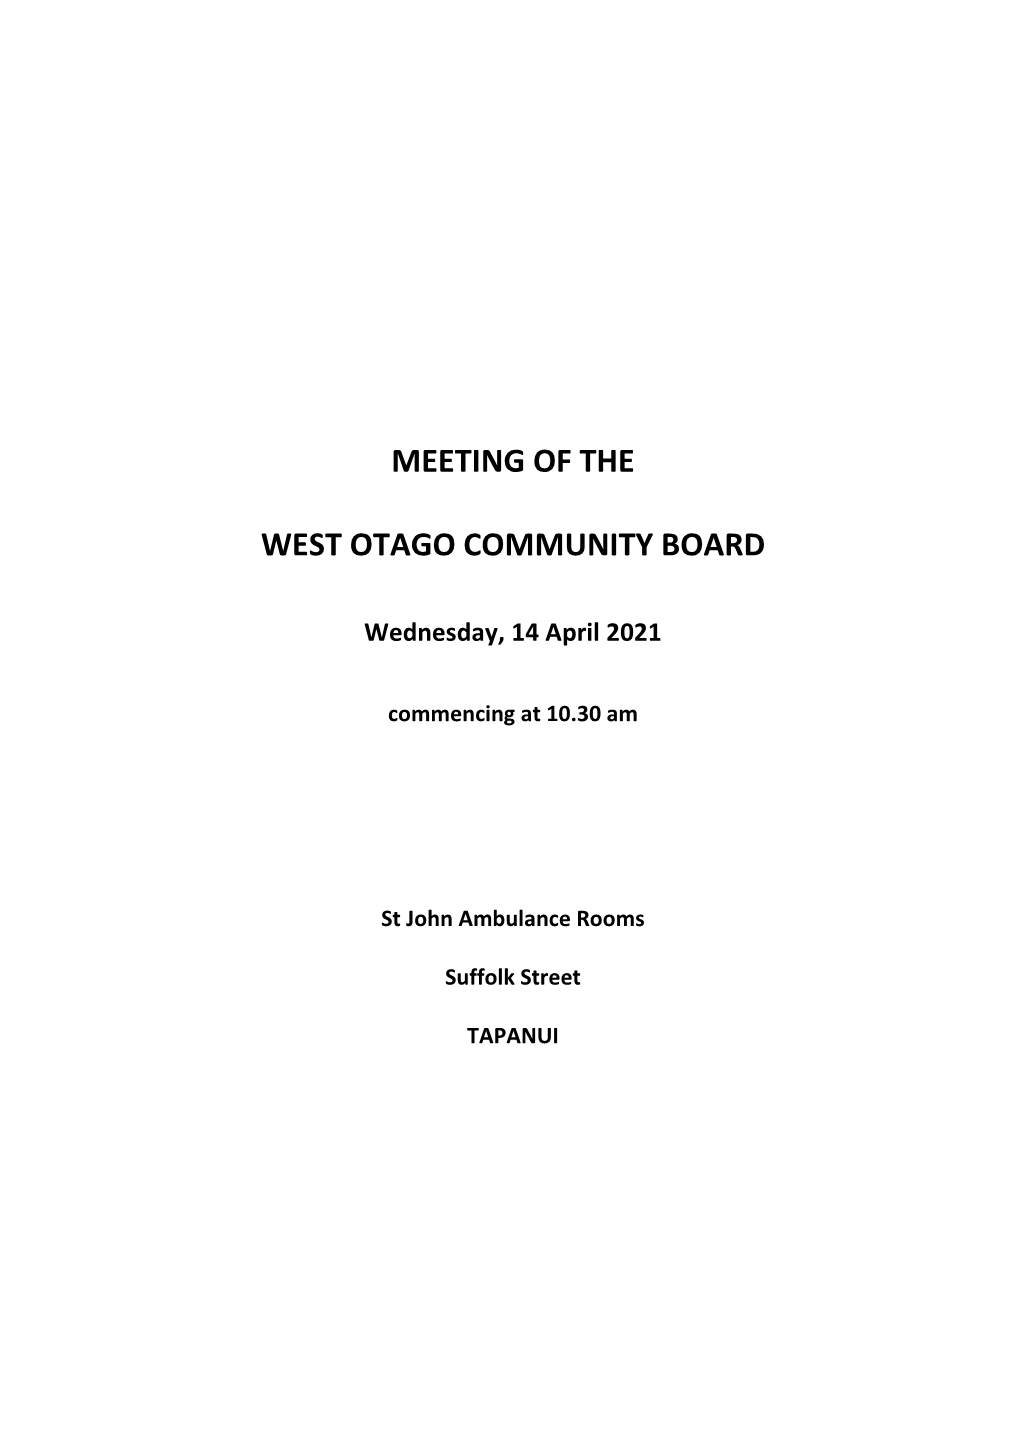 Meeting of the West Otago Community Board Will Be Held in the St John Ambulance Rooms, Suffolk Street, Tapanui on Wednesday, 14 April 2021, Commencing at 10.30 Am